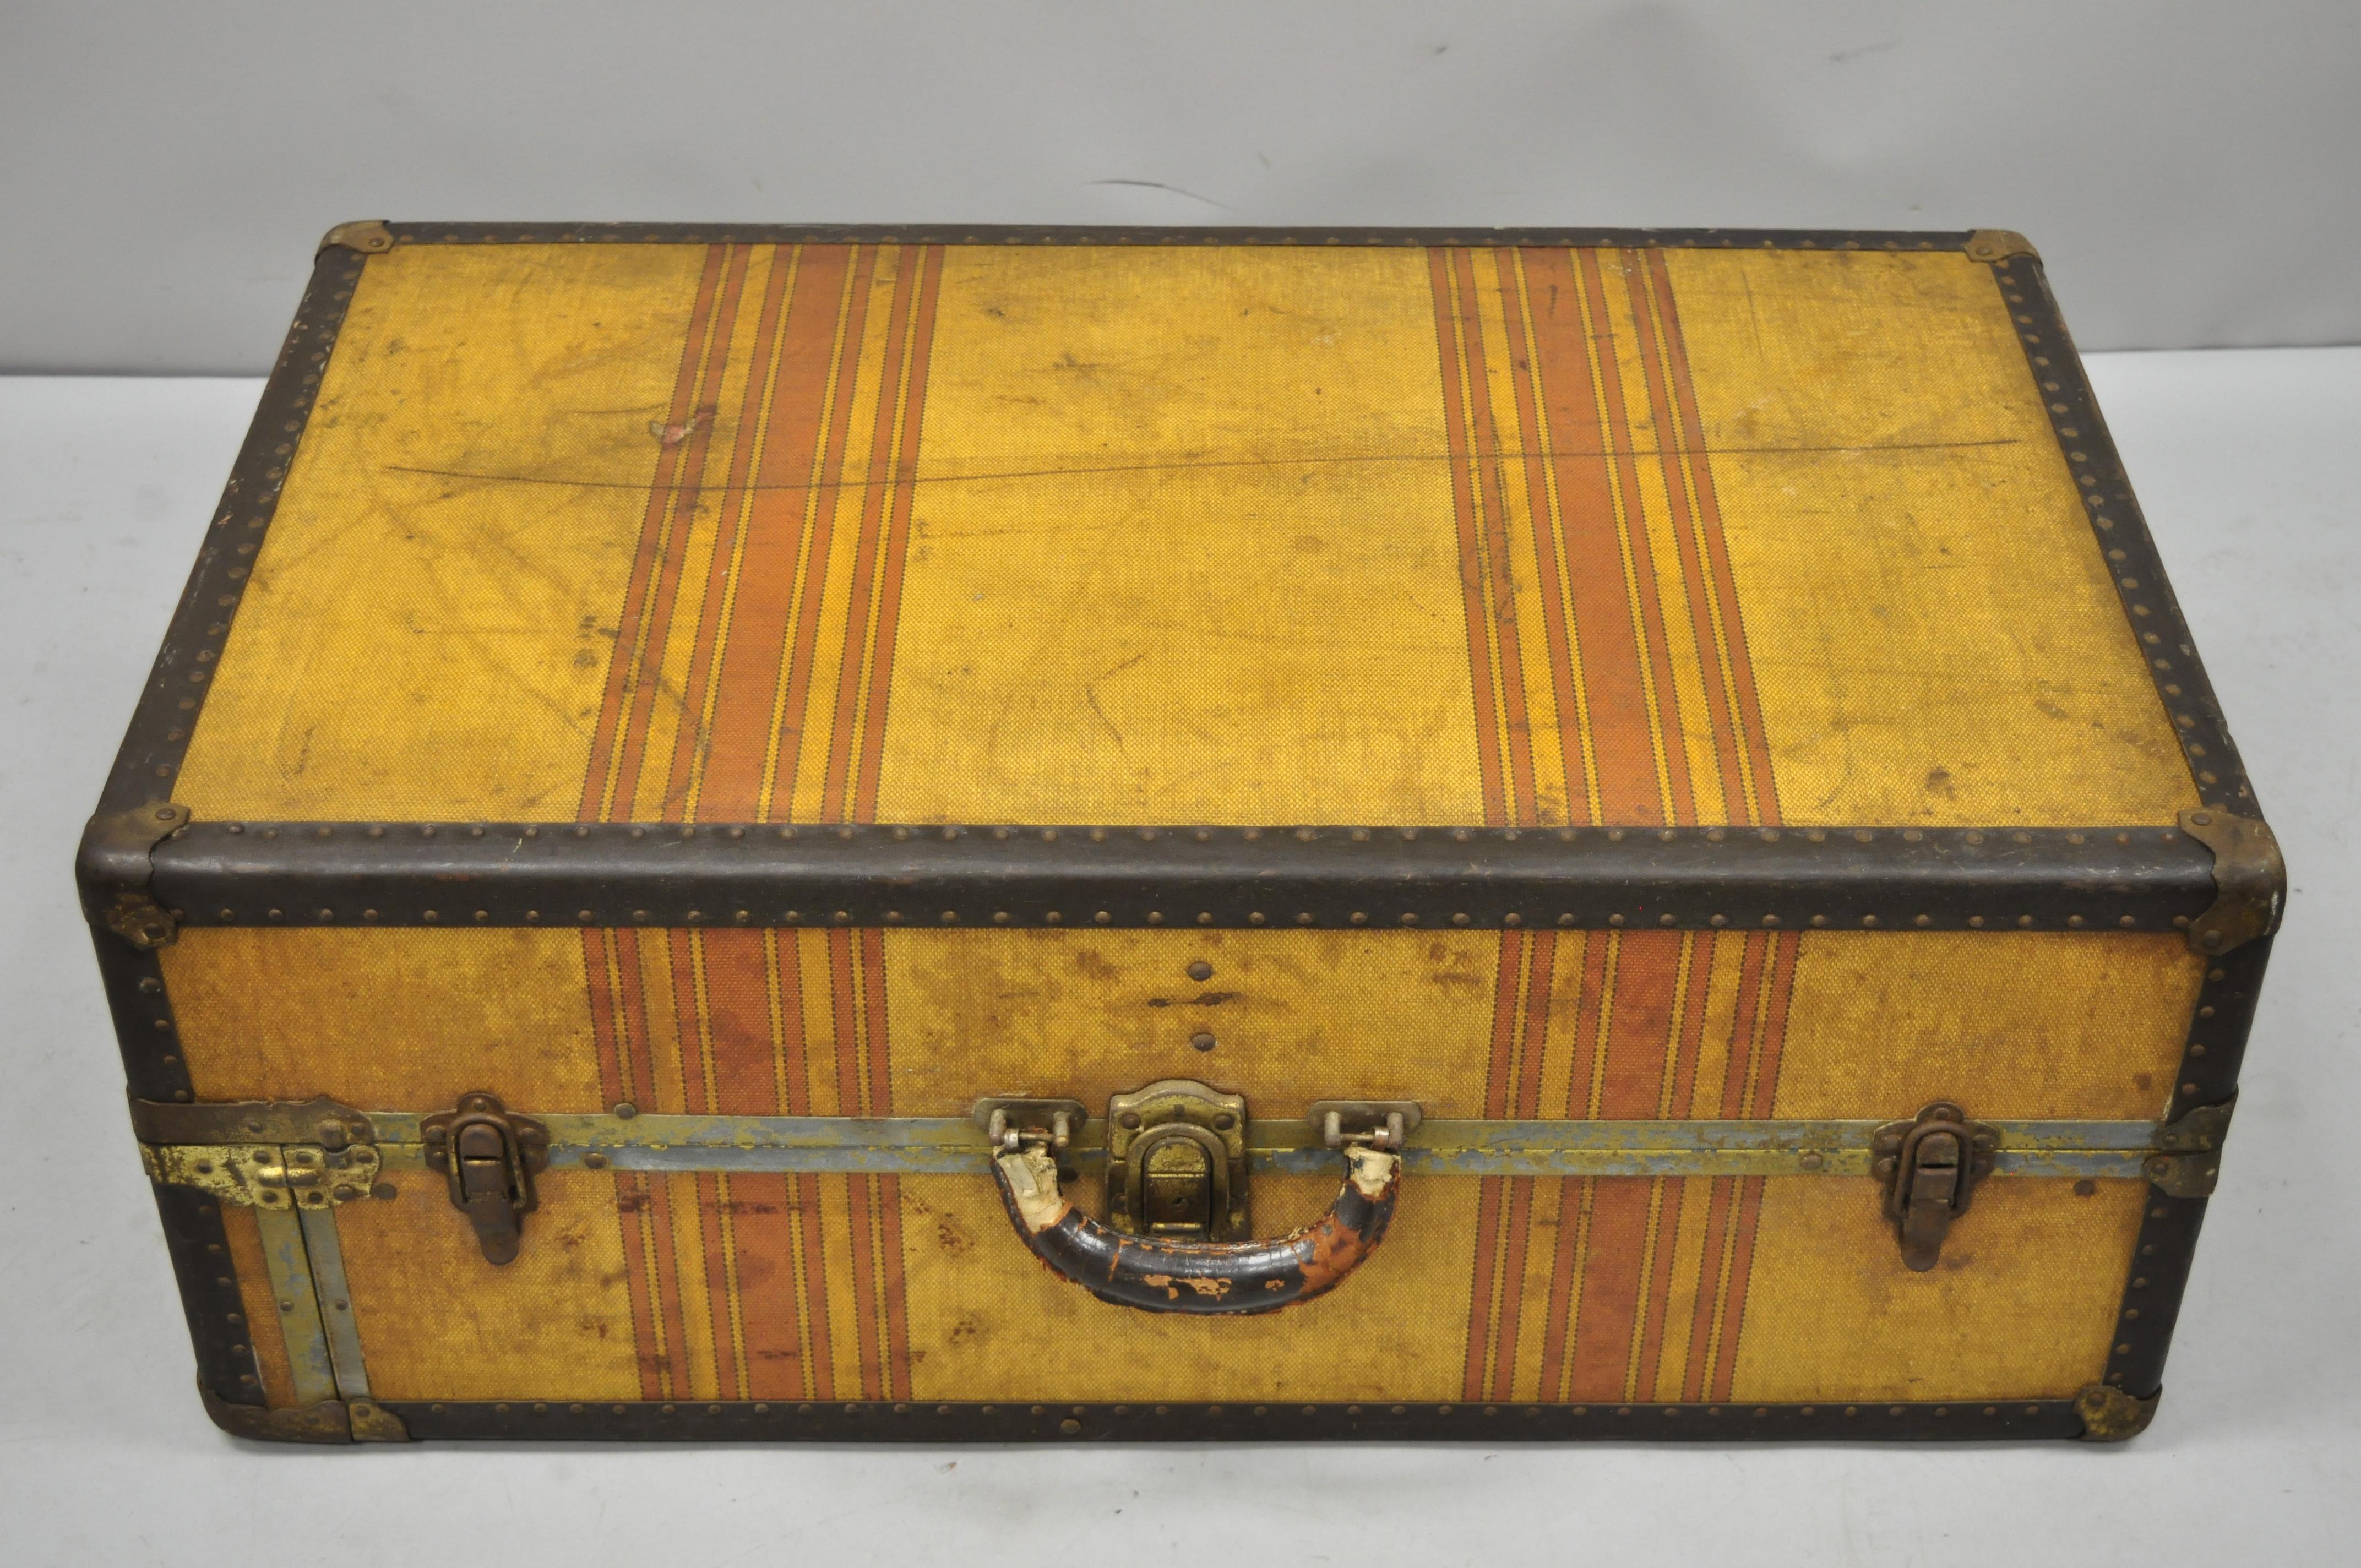 Antique Compact Wardrobe Steamer Trunk Travel Hard Luggage Suitcase Chest 1